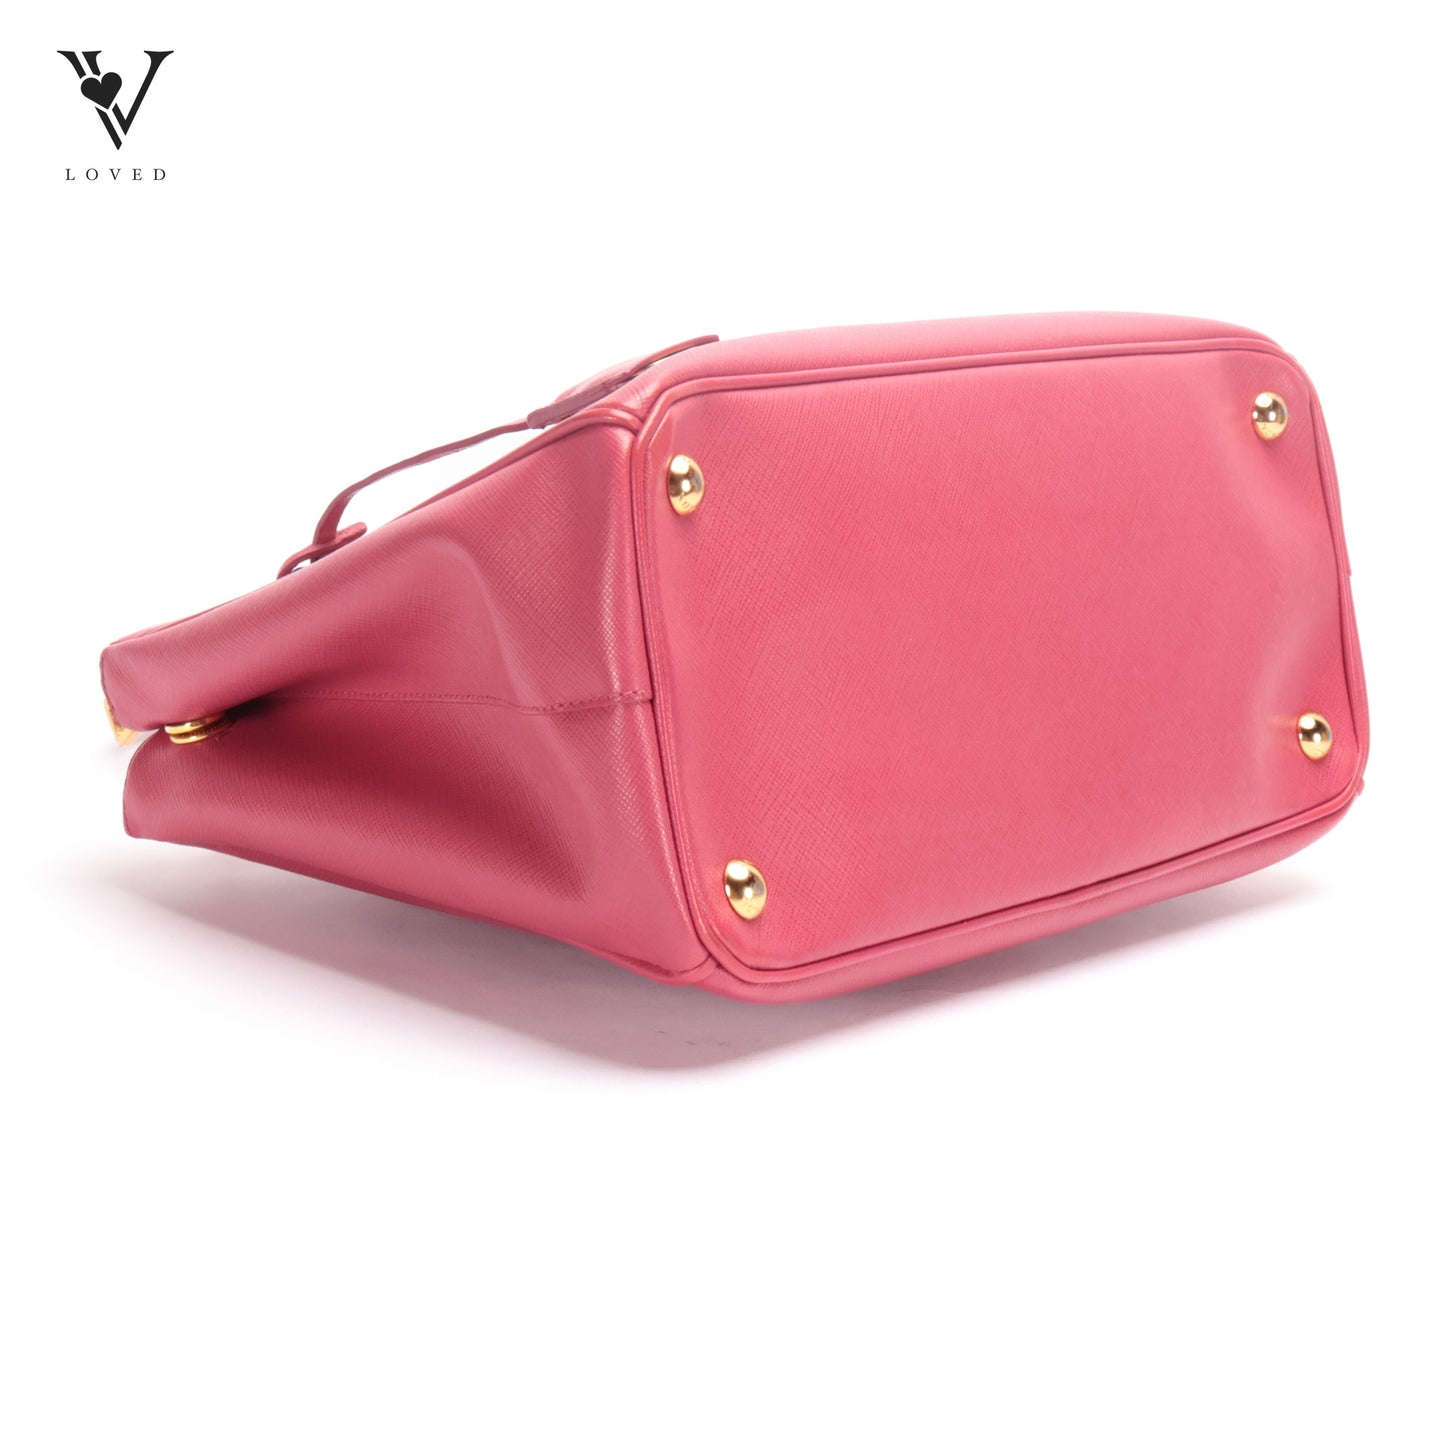 Galleria Double Zipped Two-way Bag in Pink Saffiano Leather